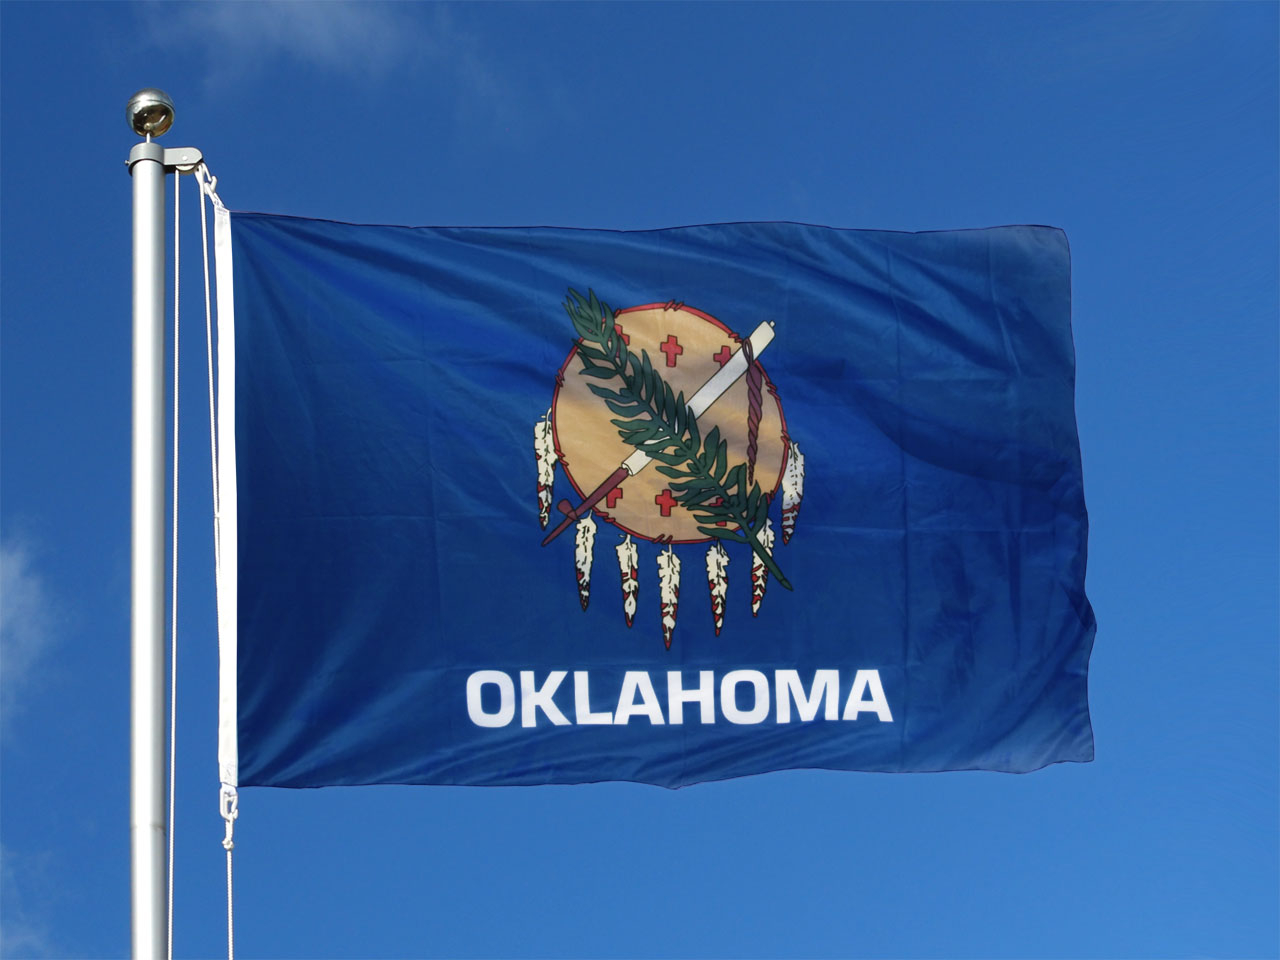 Download Oklahoma Flag for Sale - Buy online at Royal-Flags